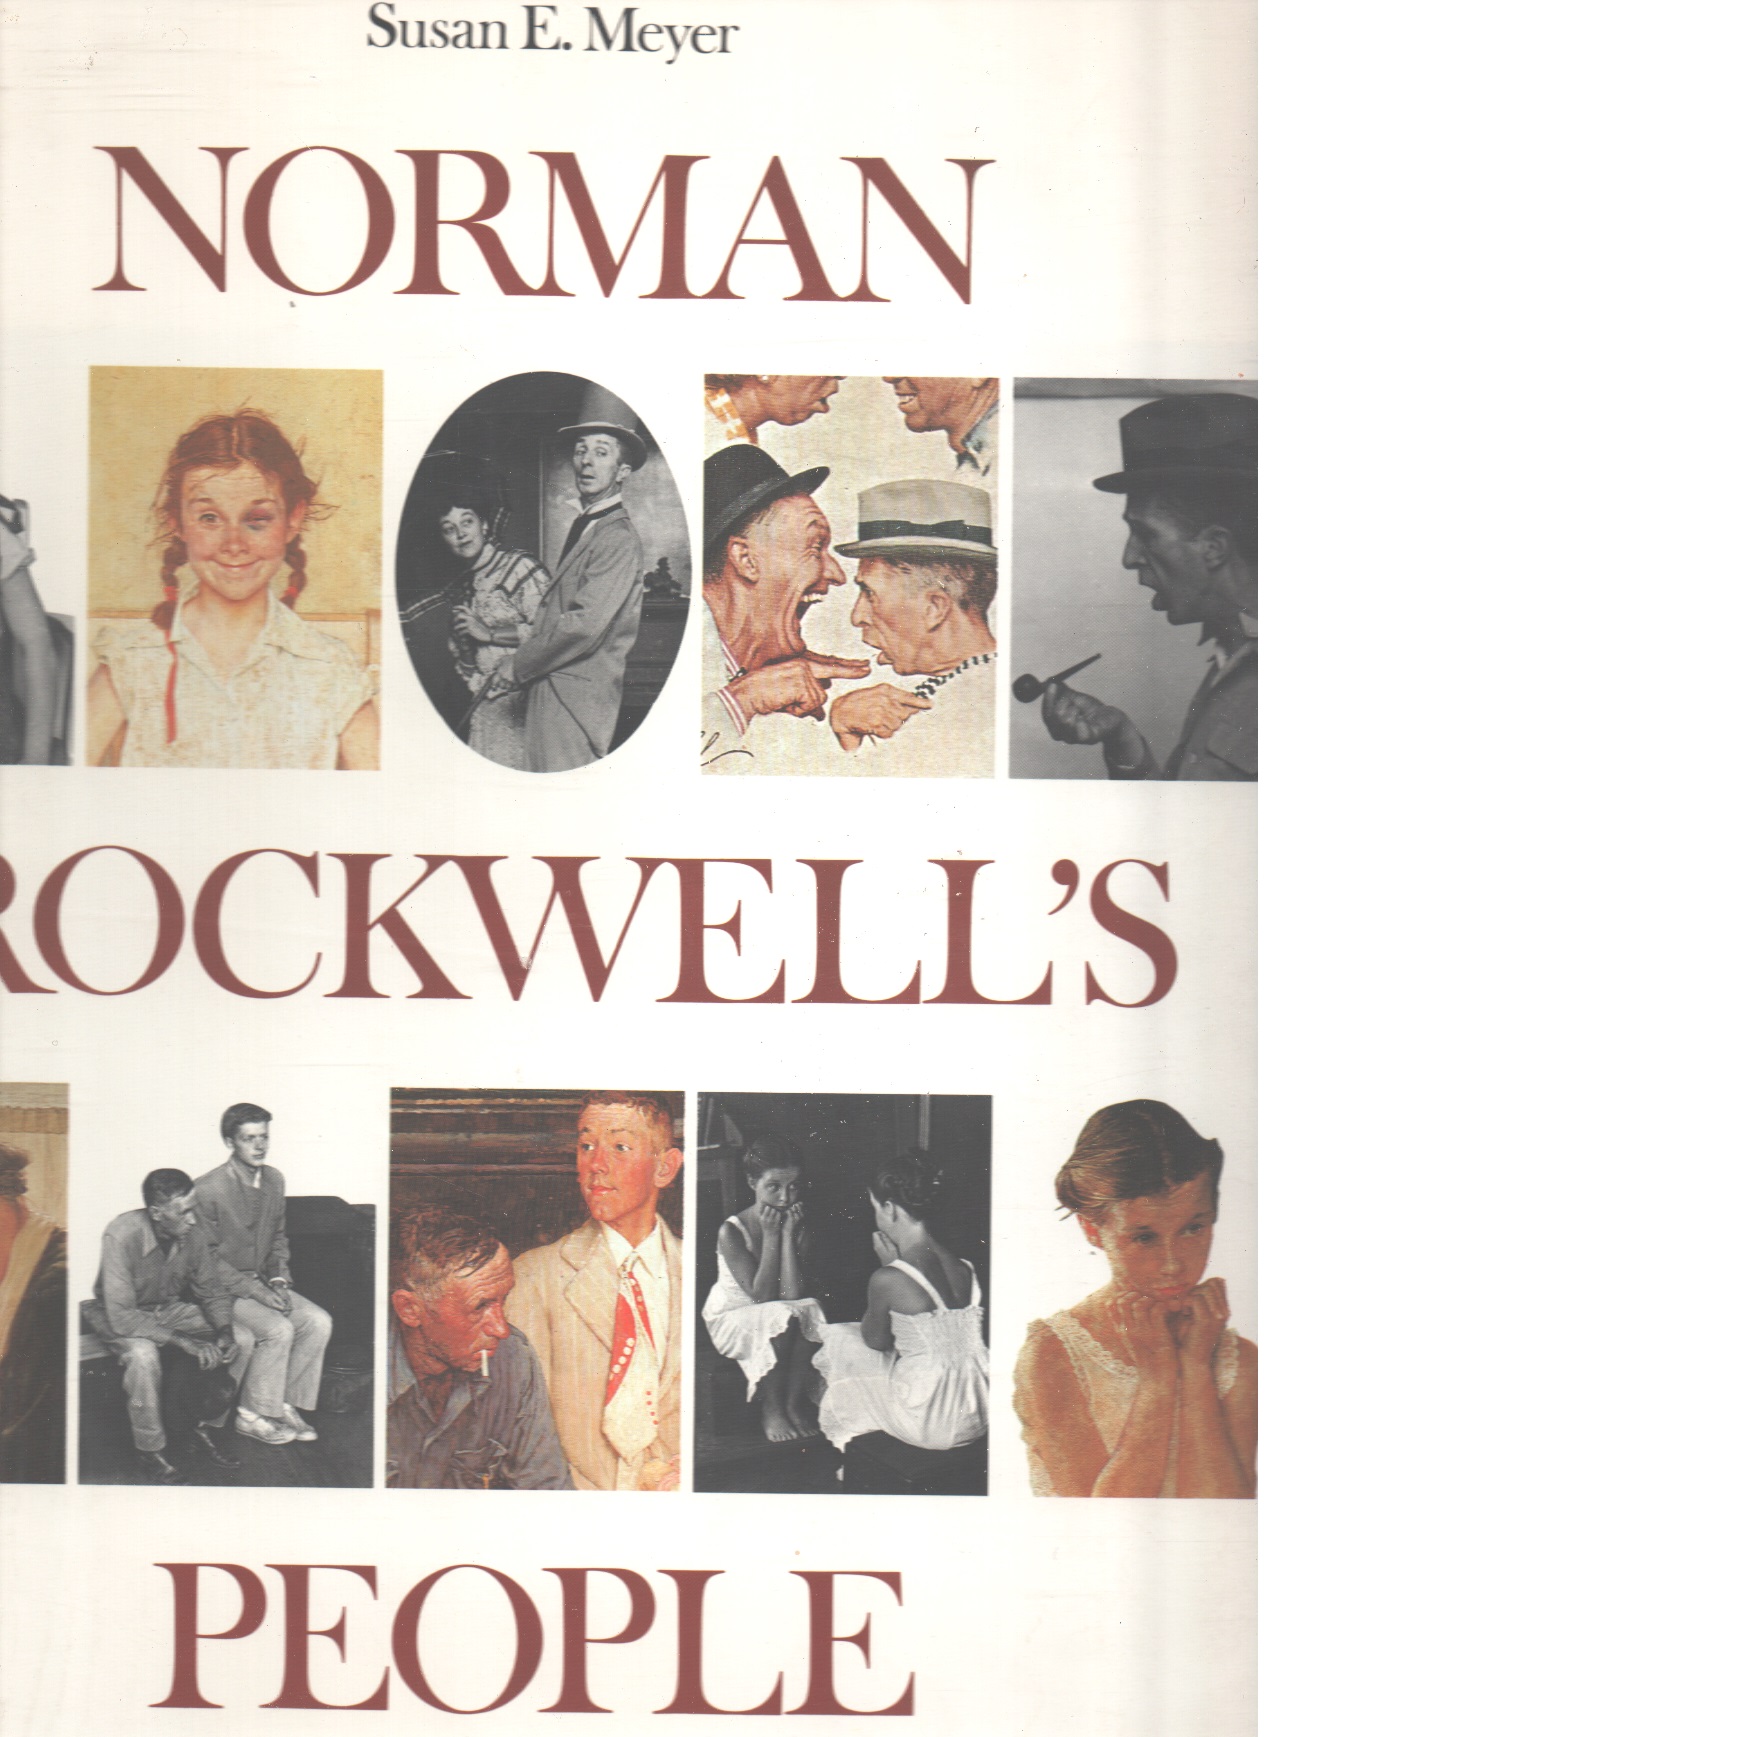 Norman rockwell's people - Meyer, Susan E